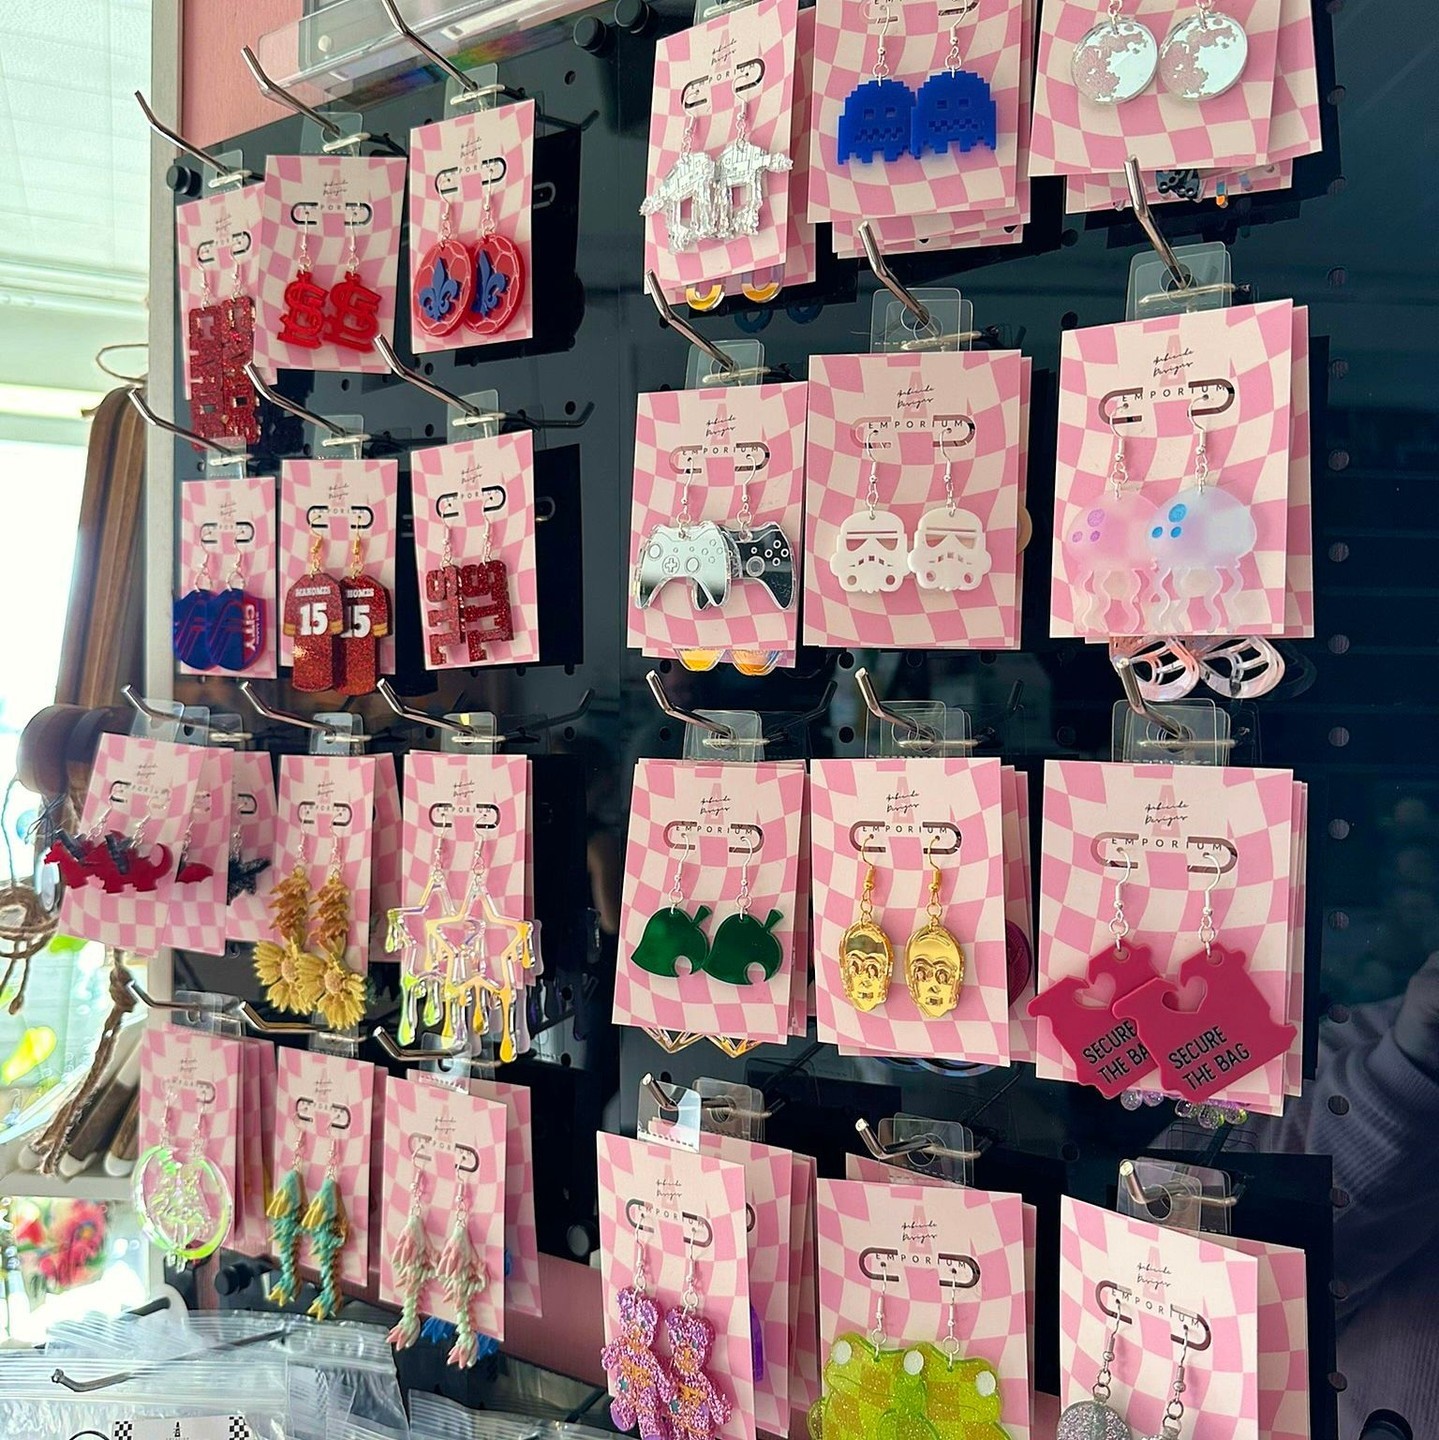 We are FULLY restocked on earrings at The Ruby Wren! Only 35 minutes from downtown St. Louis - come check out 40+ local,